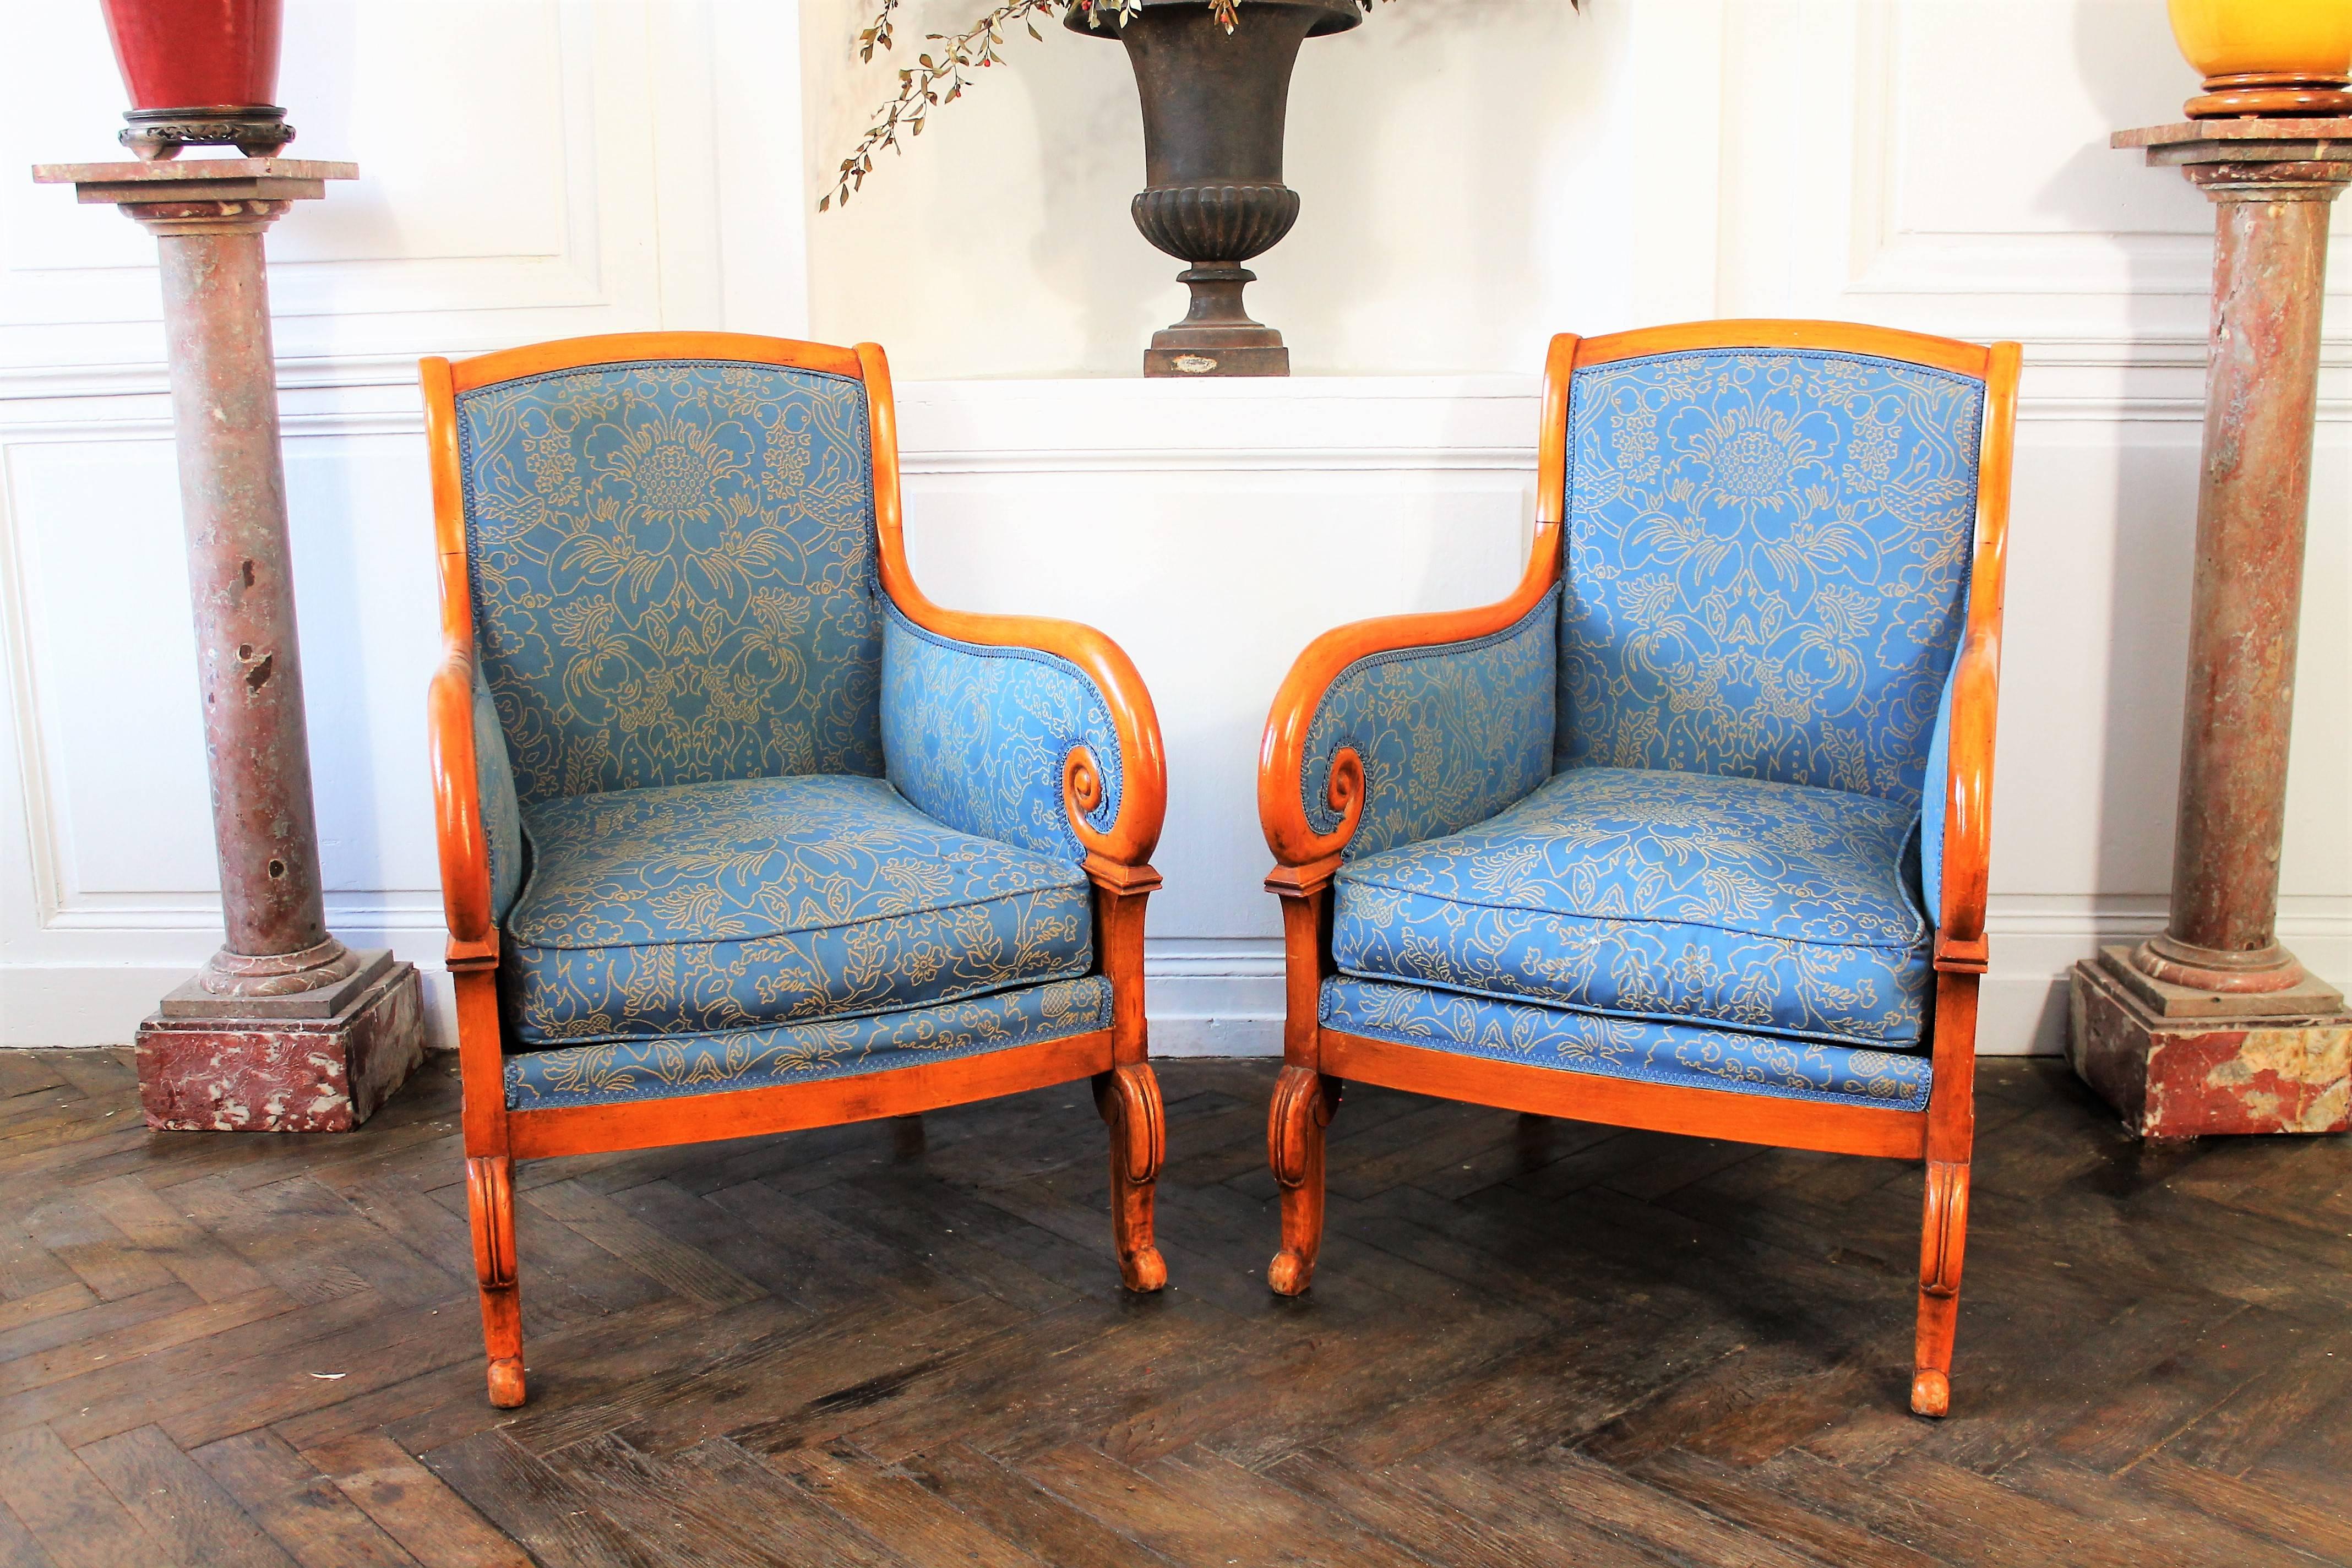 Louis Philippe Louis-Philippe Period Bergeres Armchairs in Fruitwood